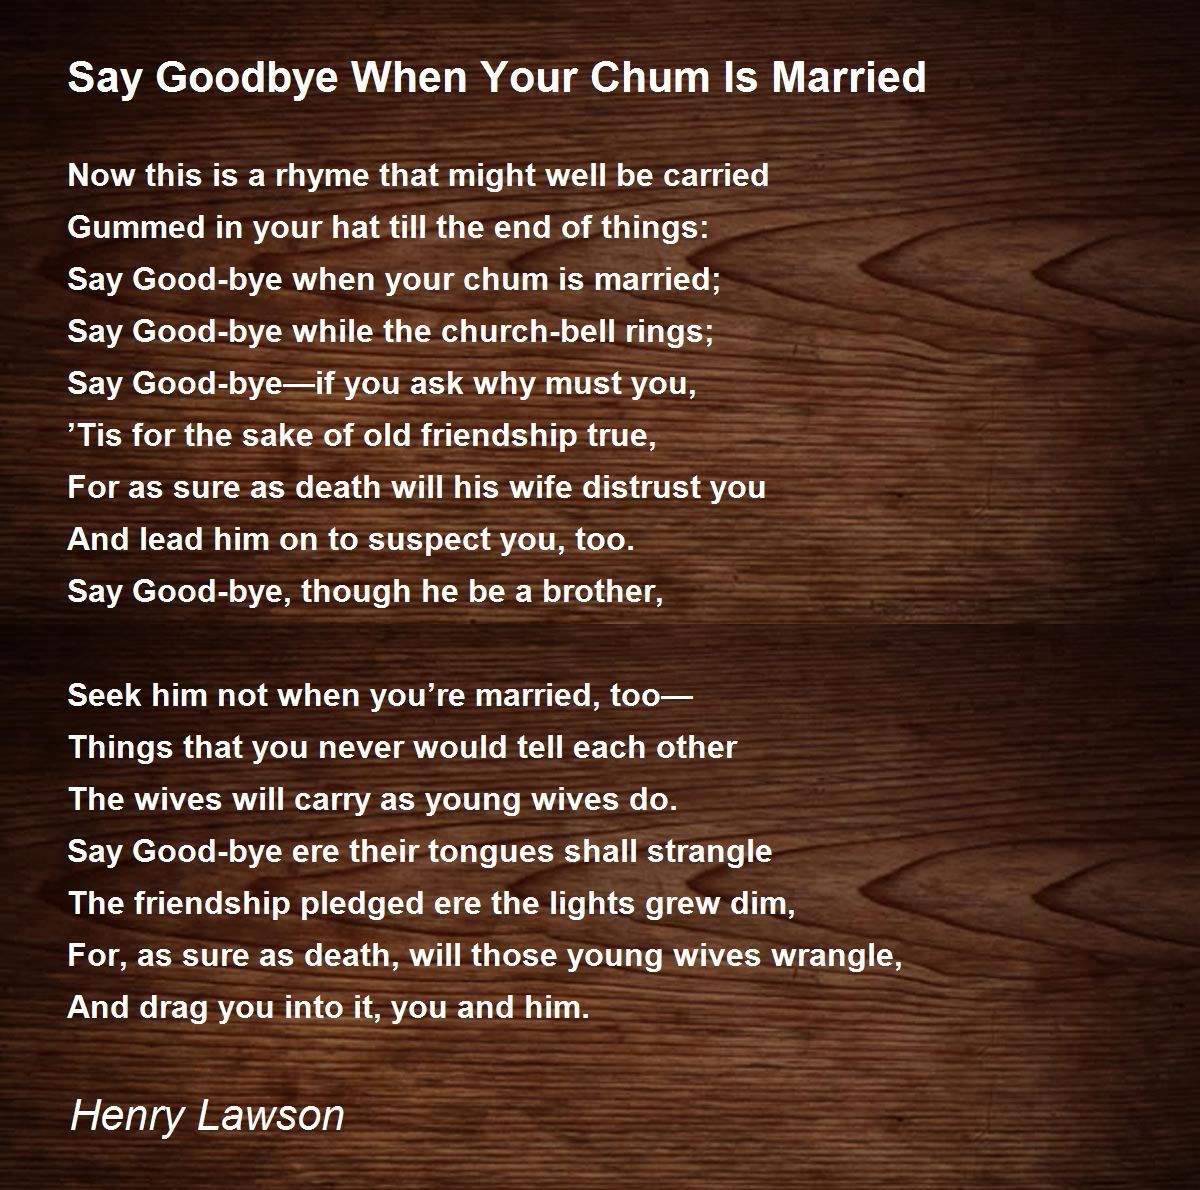 Read Say Goodbye When Your Chum Is Married poem by Henry Lawson written. 